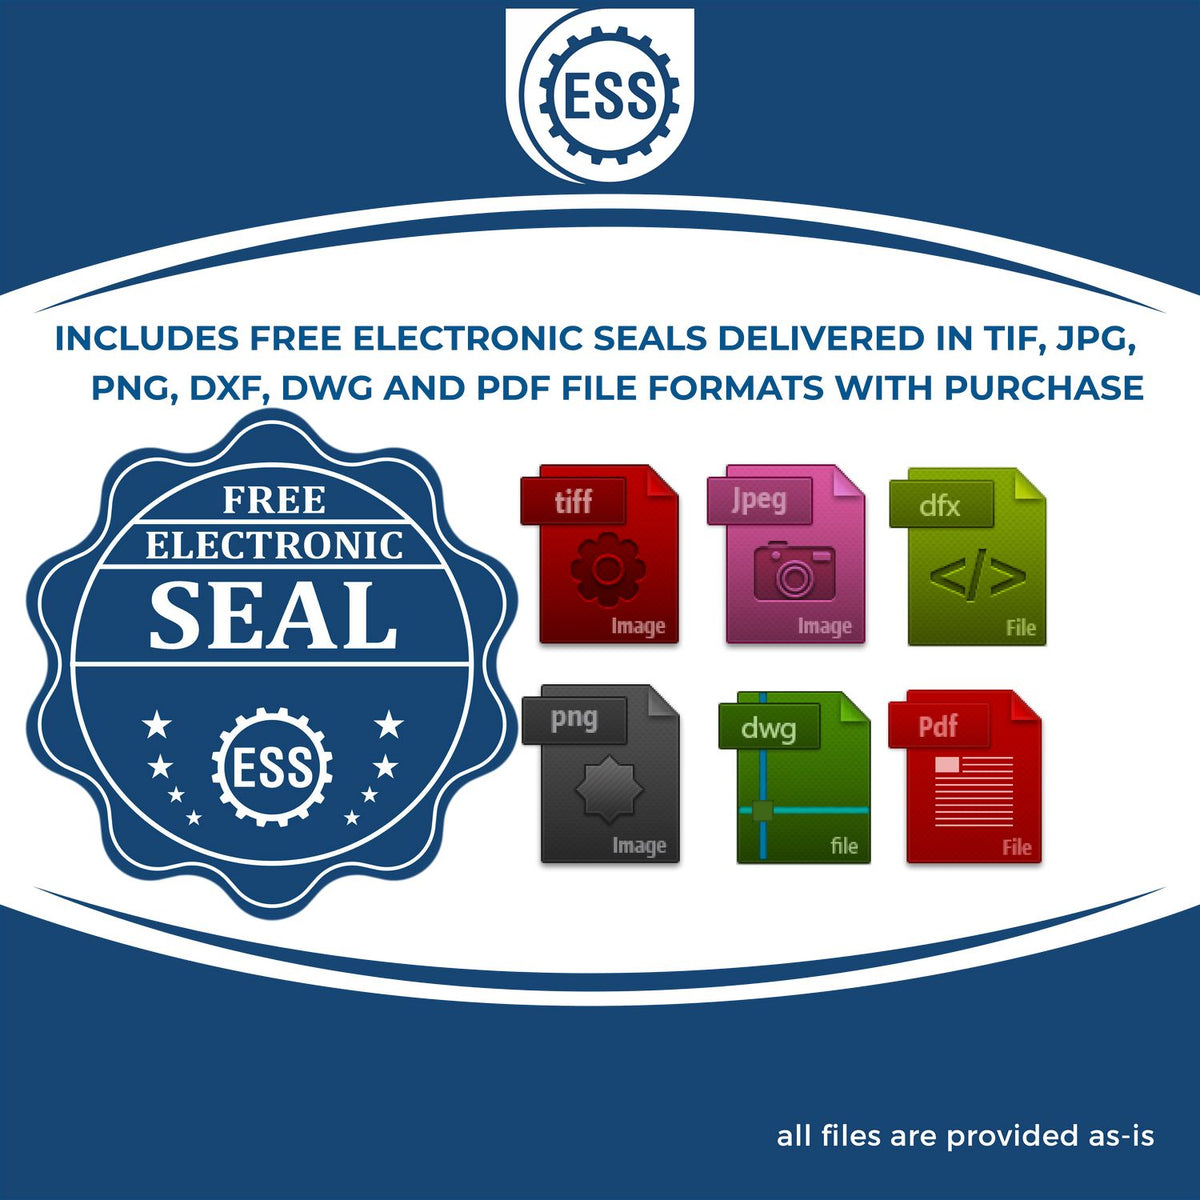 An infographic for the free electronic seal for the Soft Texas Professional Geologist Seal illustrating the different file type icons such as DXF, DWG, TIF, JPG and PNG.